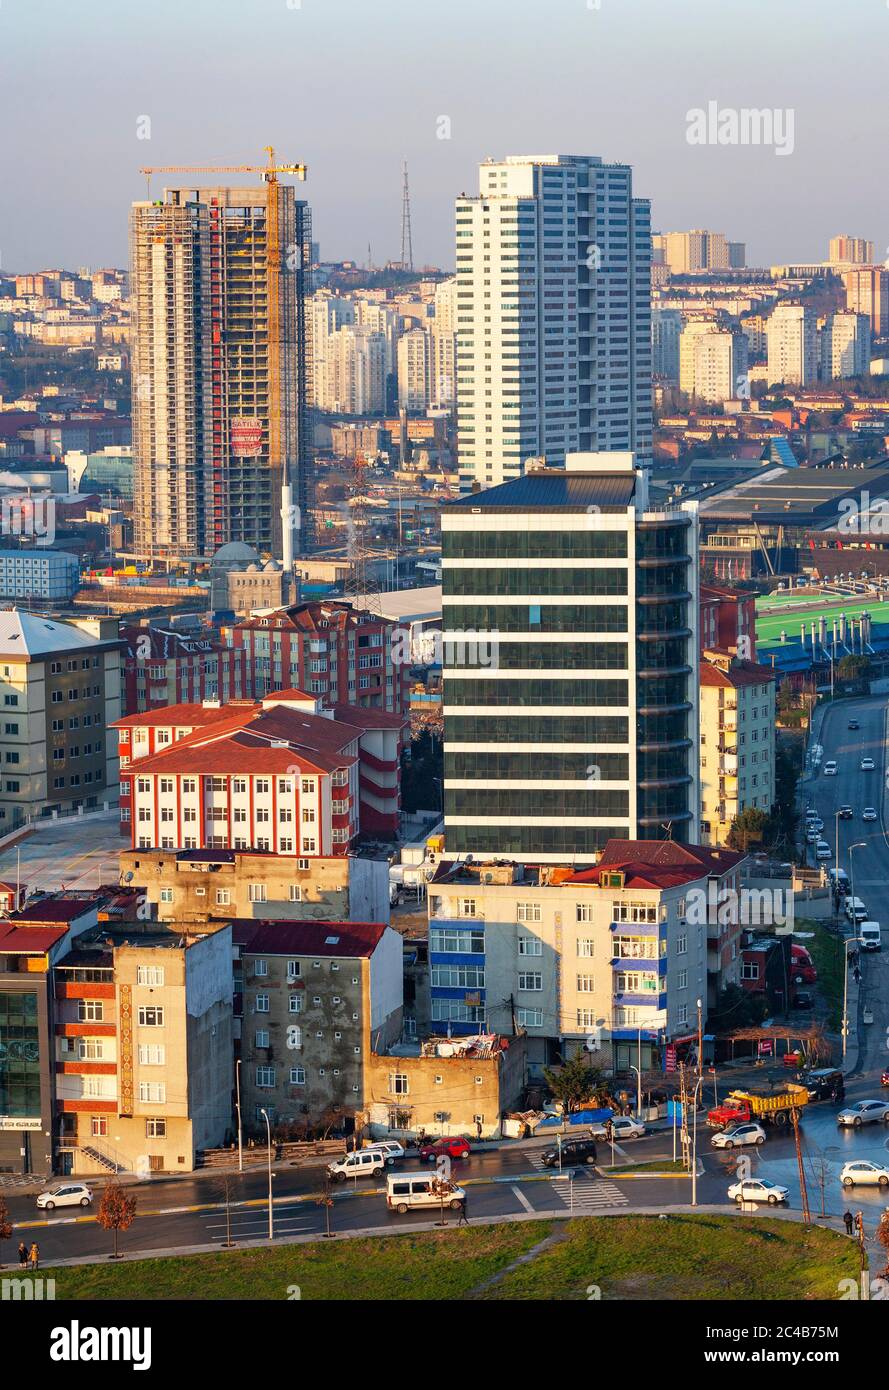 City view with old residential buildings and new high-rise buildings, Istanbul, Turkey Stock Photo